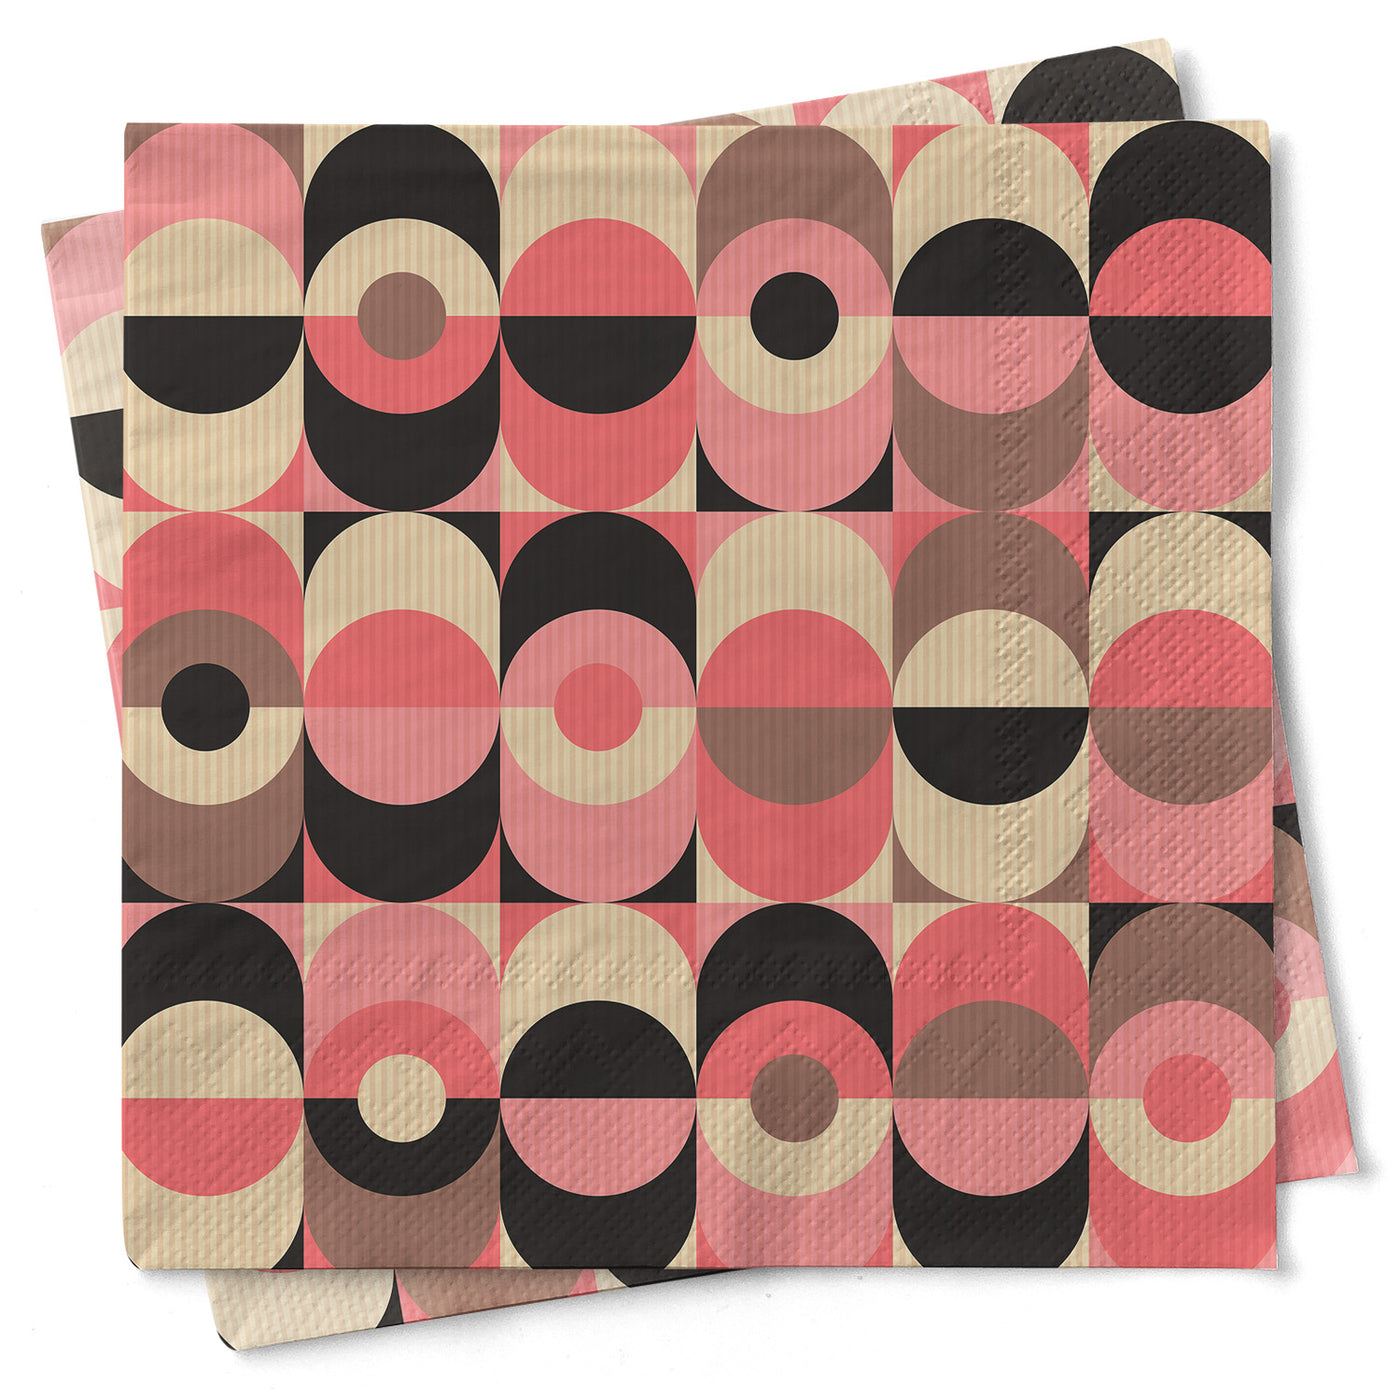 Mid Century Modern geometric design cocktail beverage napkin will be a great add-on to any bar or cocktail party. Great for hosting dinner parties, cocktail parties, give a gift for a host/hostess, Birthday gifts, or even a Happy housewarming!